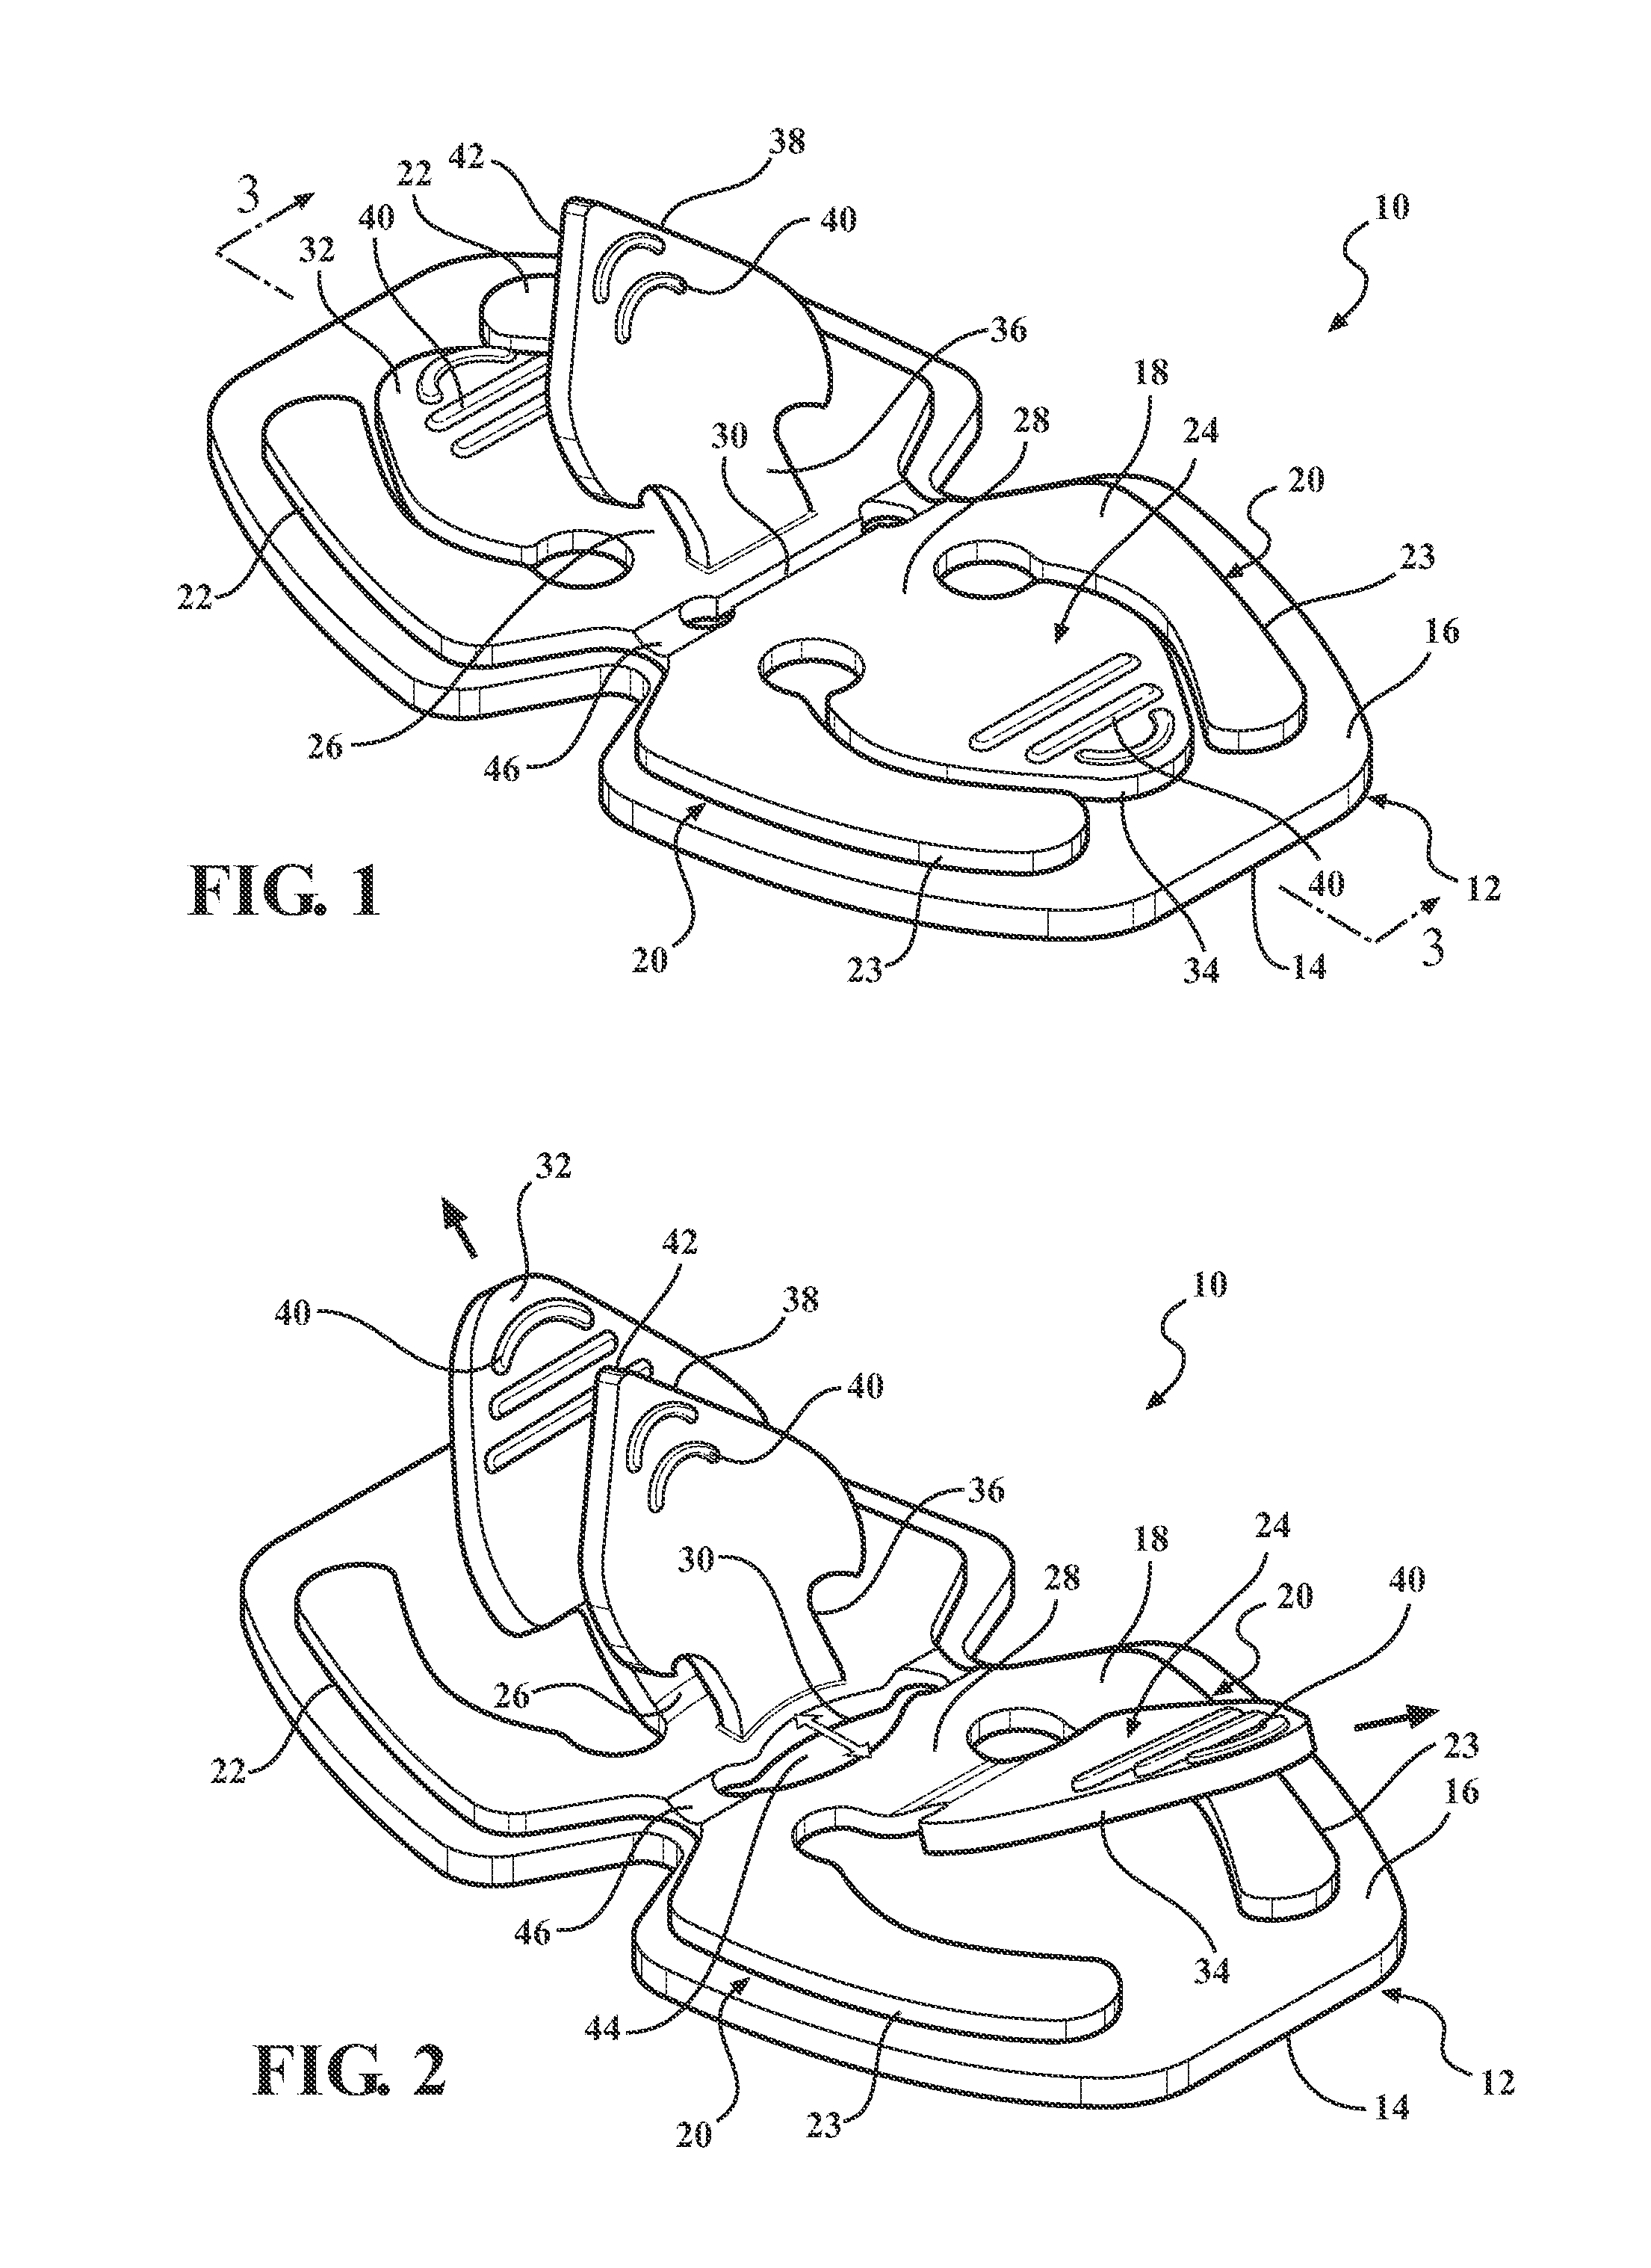 Specialized catheter securement devices for peripherally inserted central catheters